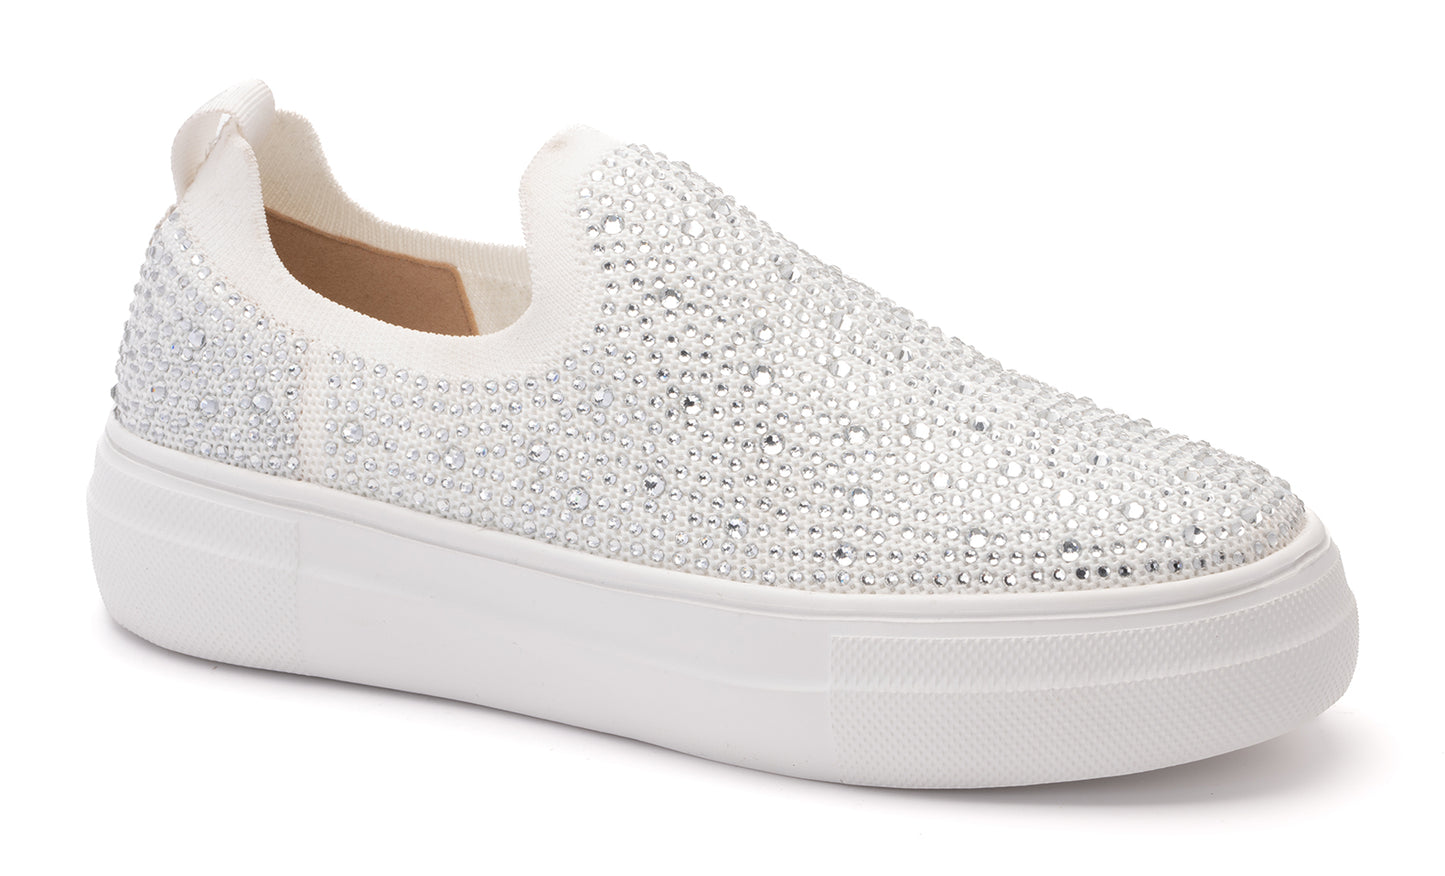 Bedazzled Slip Ons